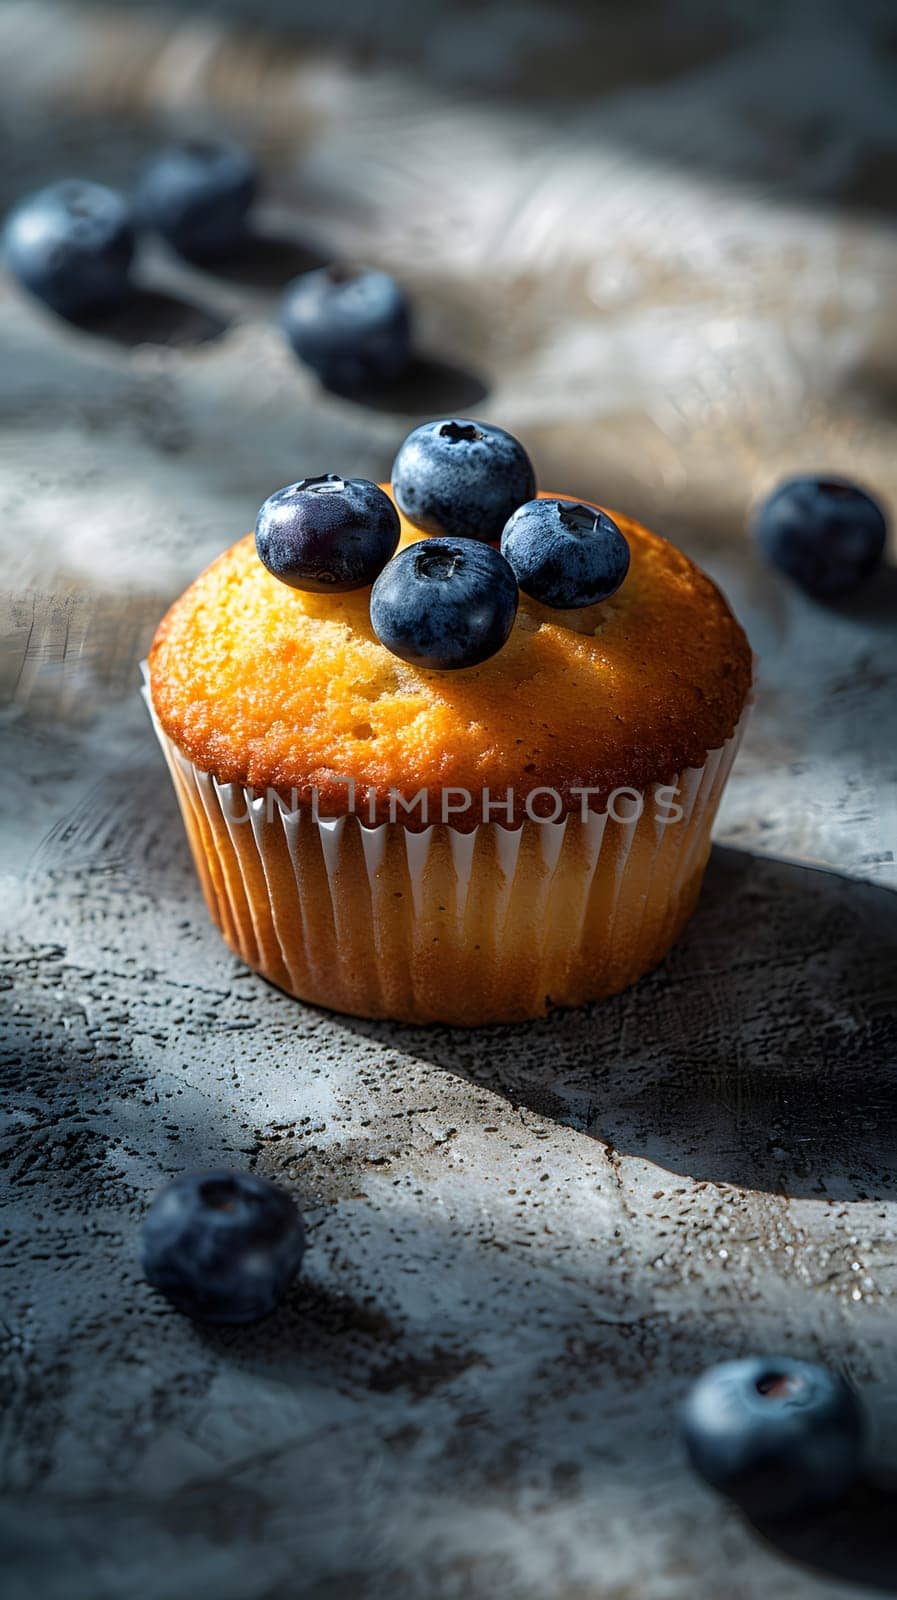 A delectable cupcake topped with fresh blueberries sits on a table, enticing anyone with its sweet aroma. This baked dessert is a perfect blend of ingredients, creating a delightful treat